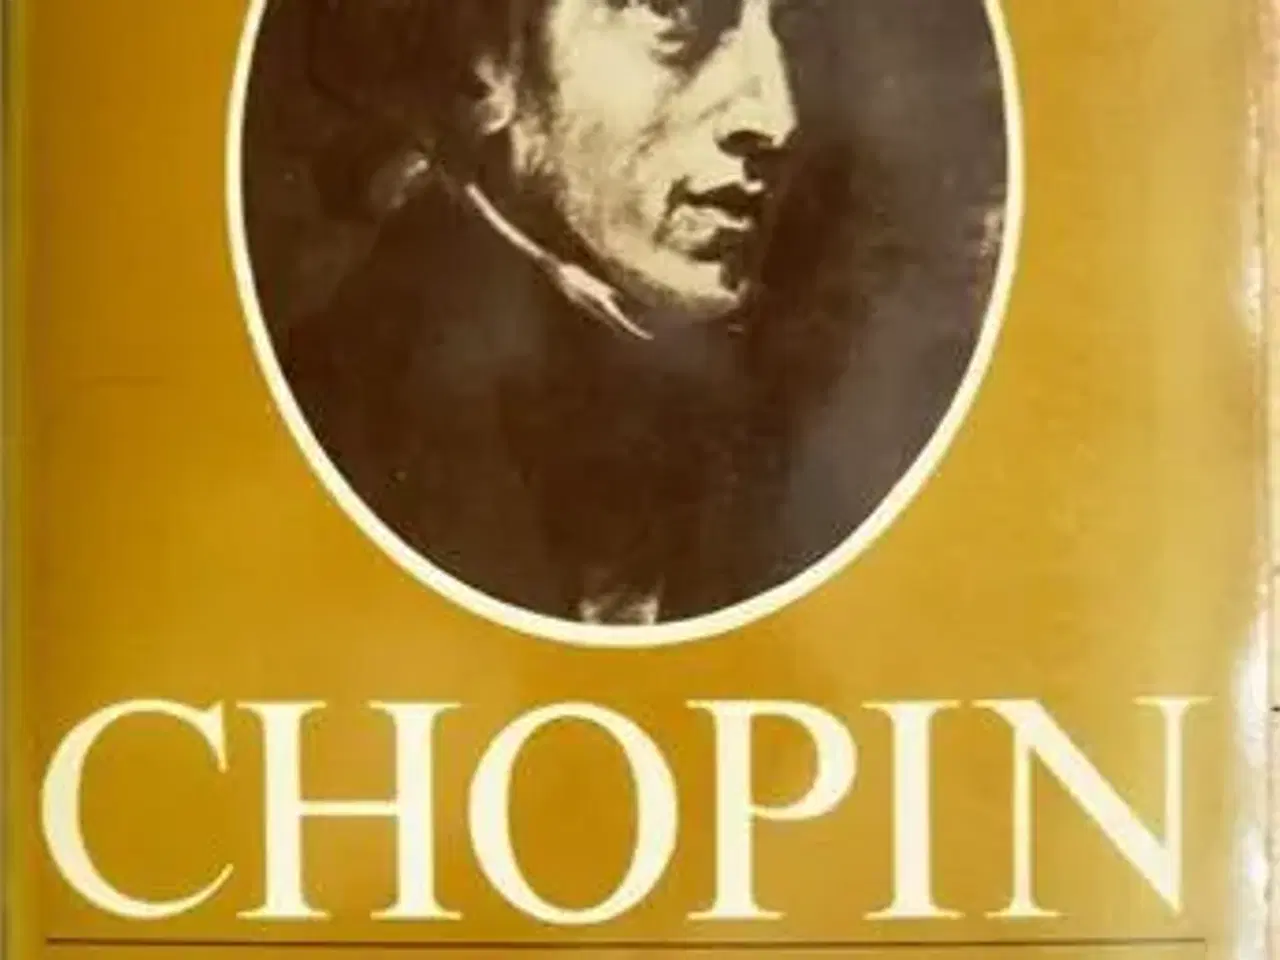 Billede 1 - CHOPIN - his life and times by Ates Orga 